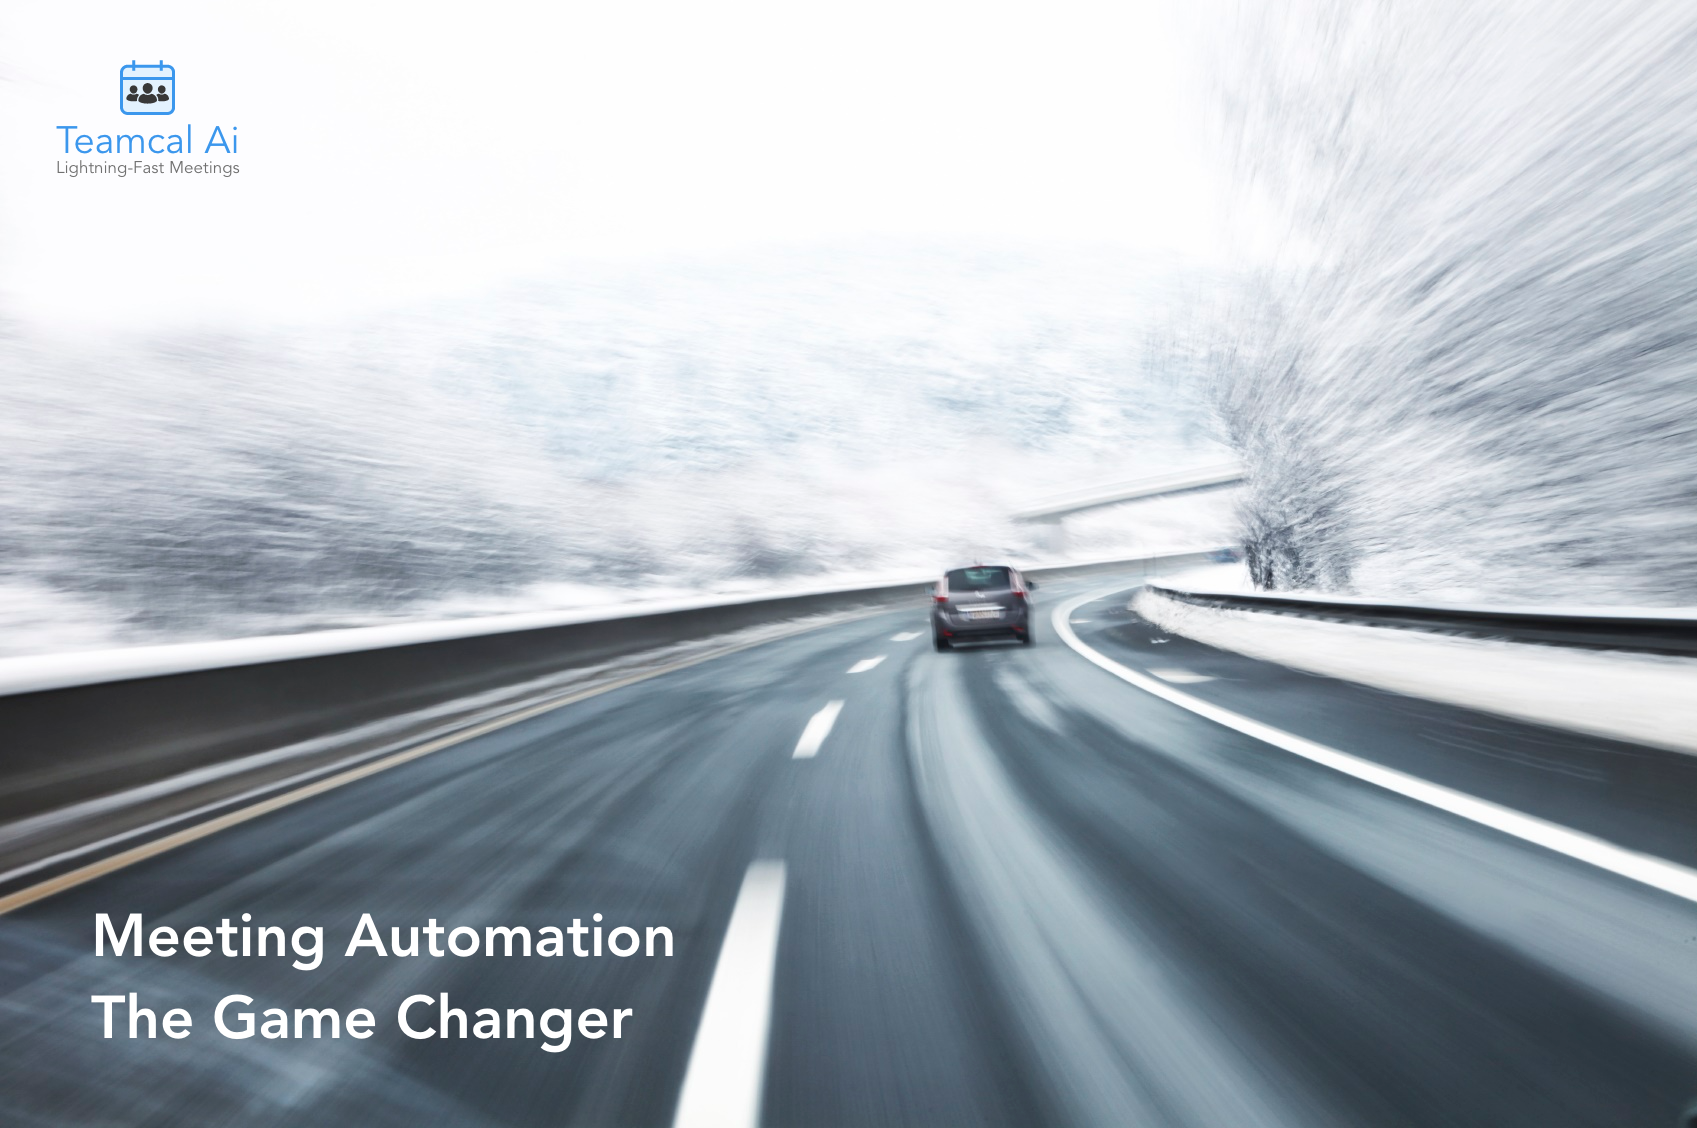 image of Meeting Automation - The Game Changer